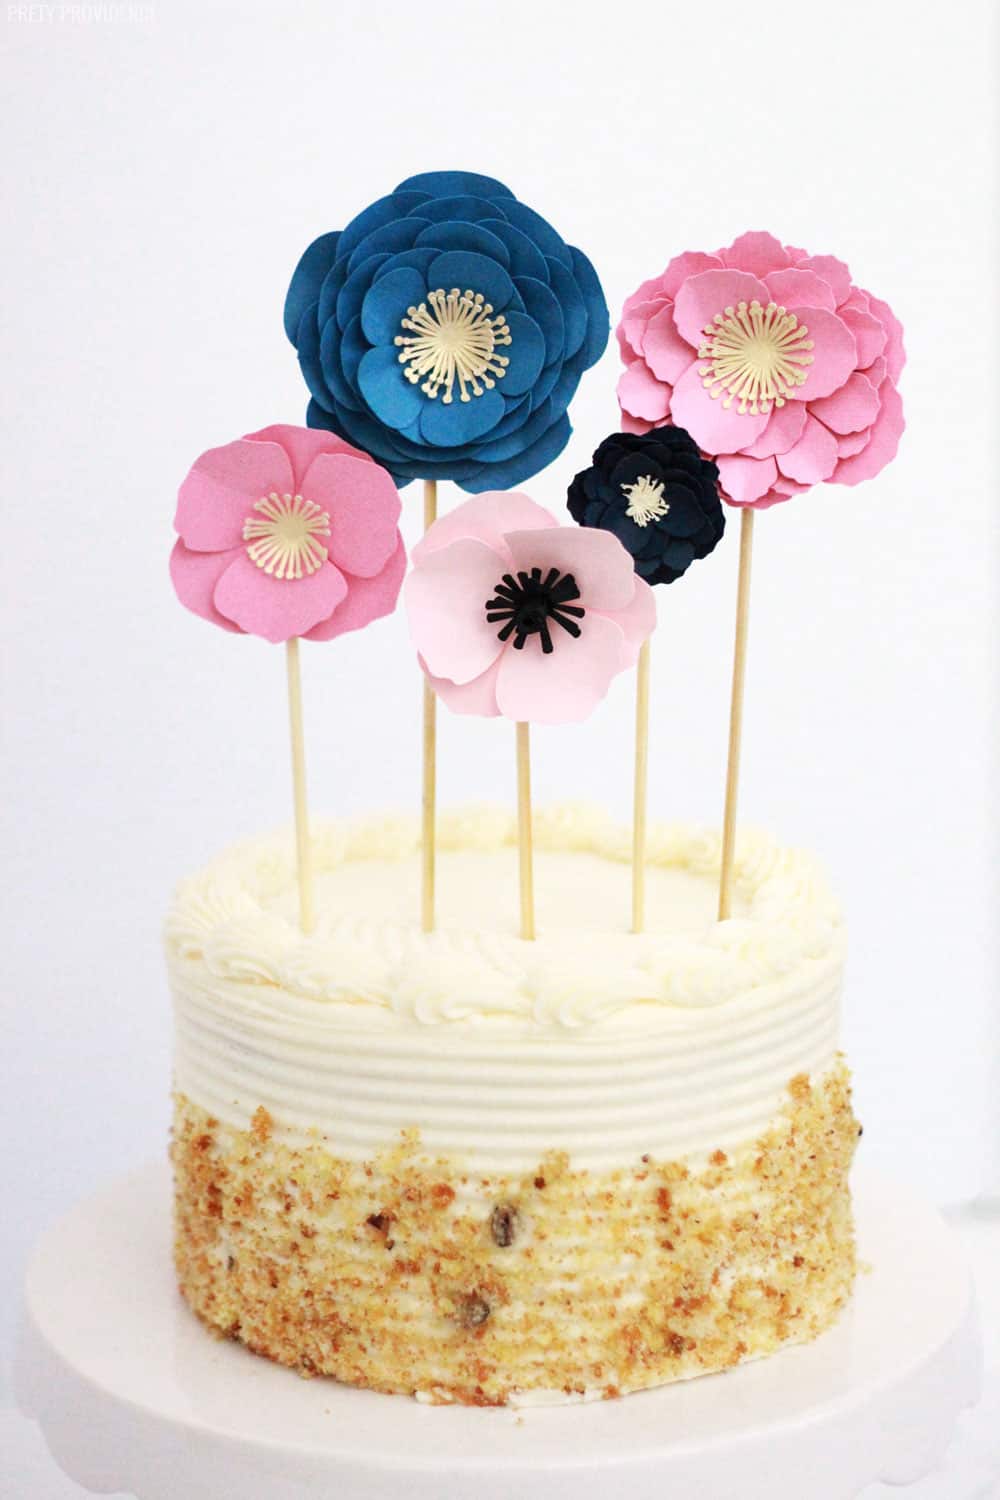 How to make an easy cake topper with paper flowers made of cardstock! This is an awesome, easy cake decorating idea!